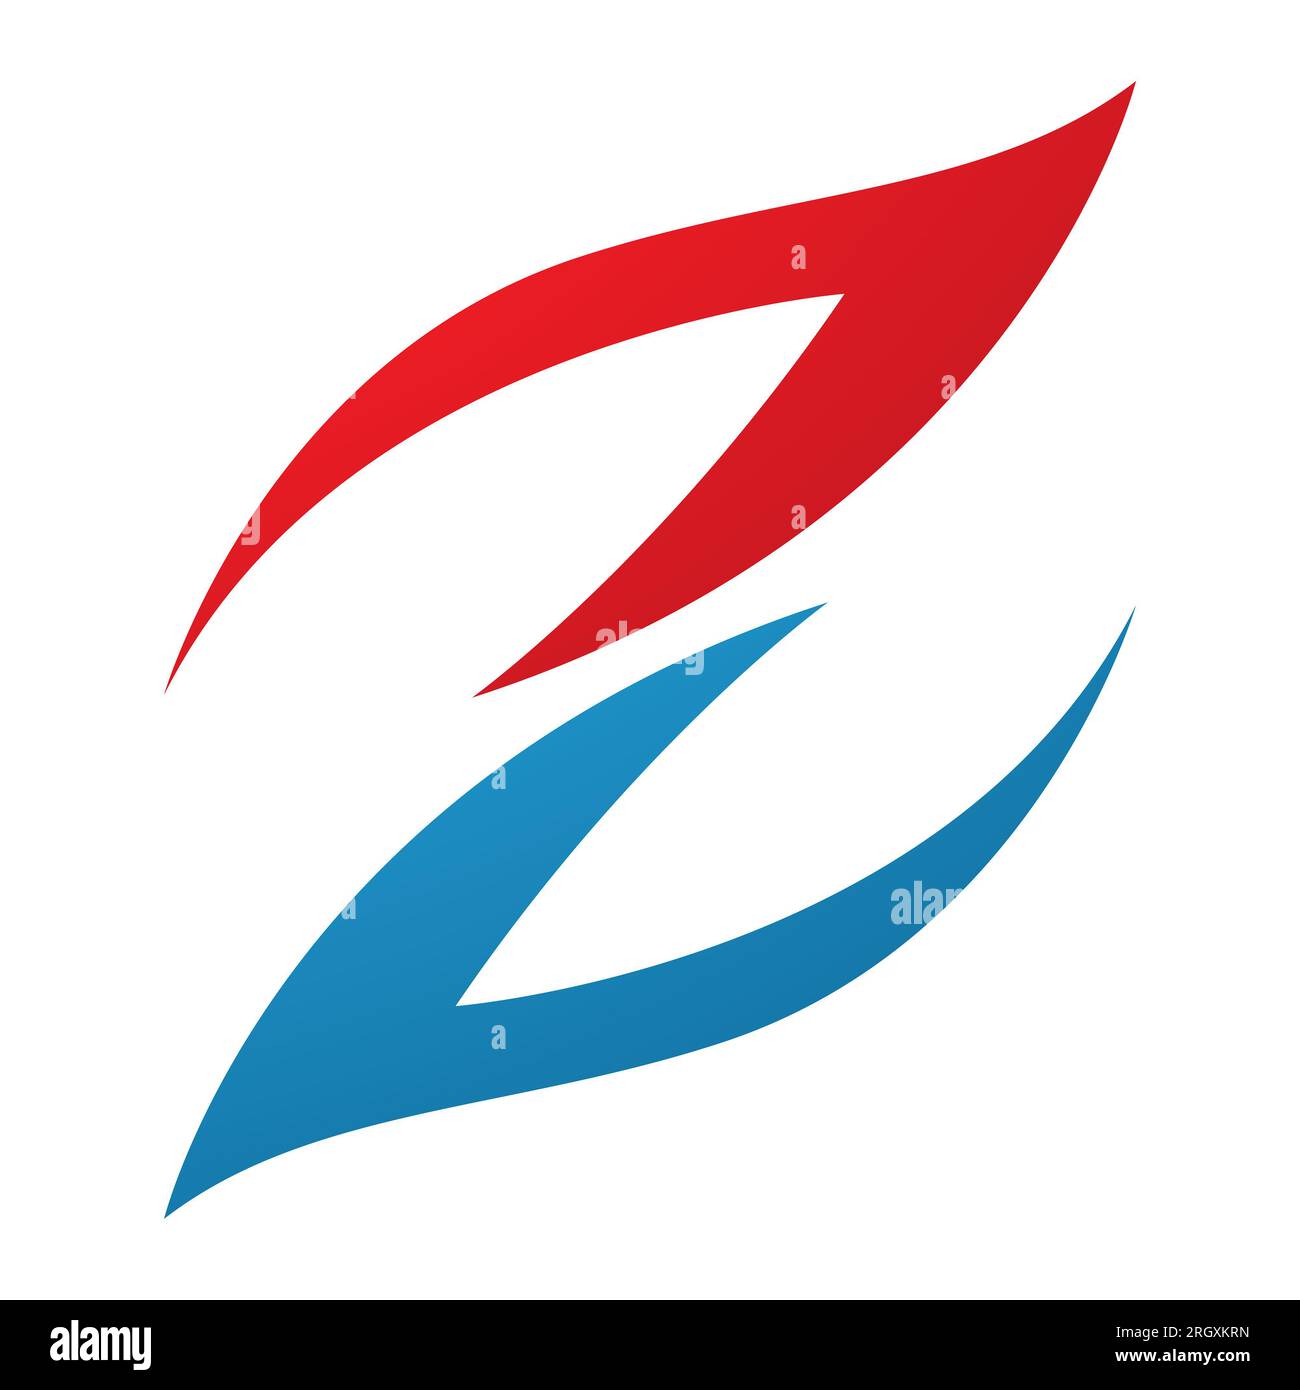 Red and Blue Fire Shaped Letter Z Icon on a White Background Stock Photo